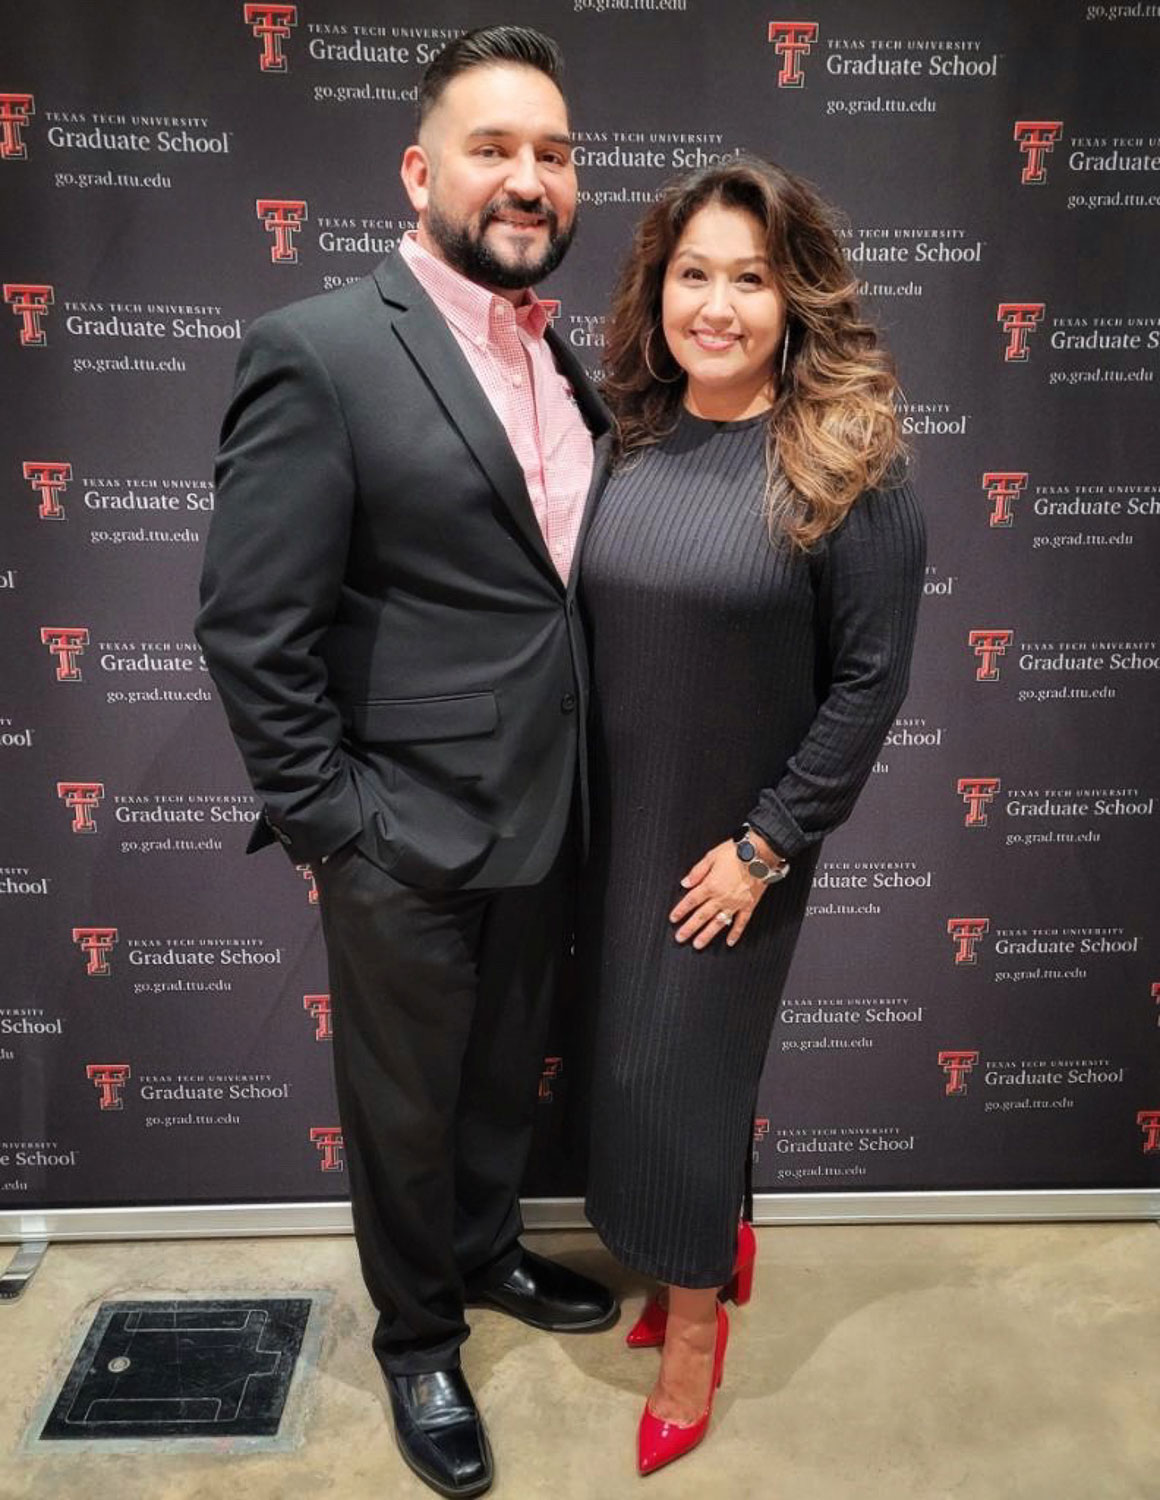 Rudy Reyes and his wife